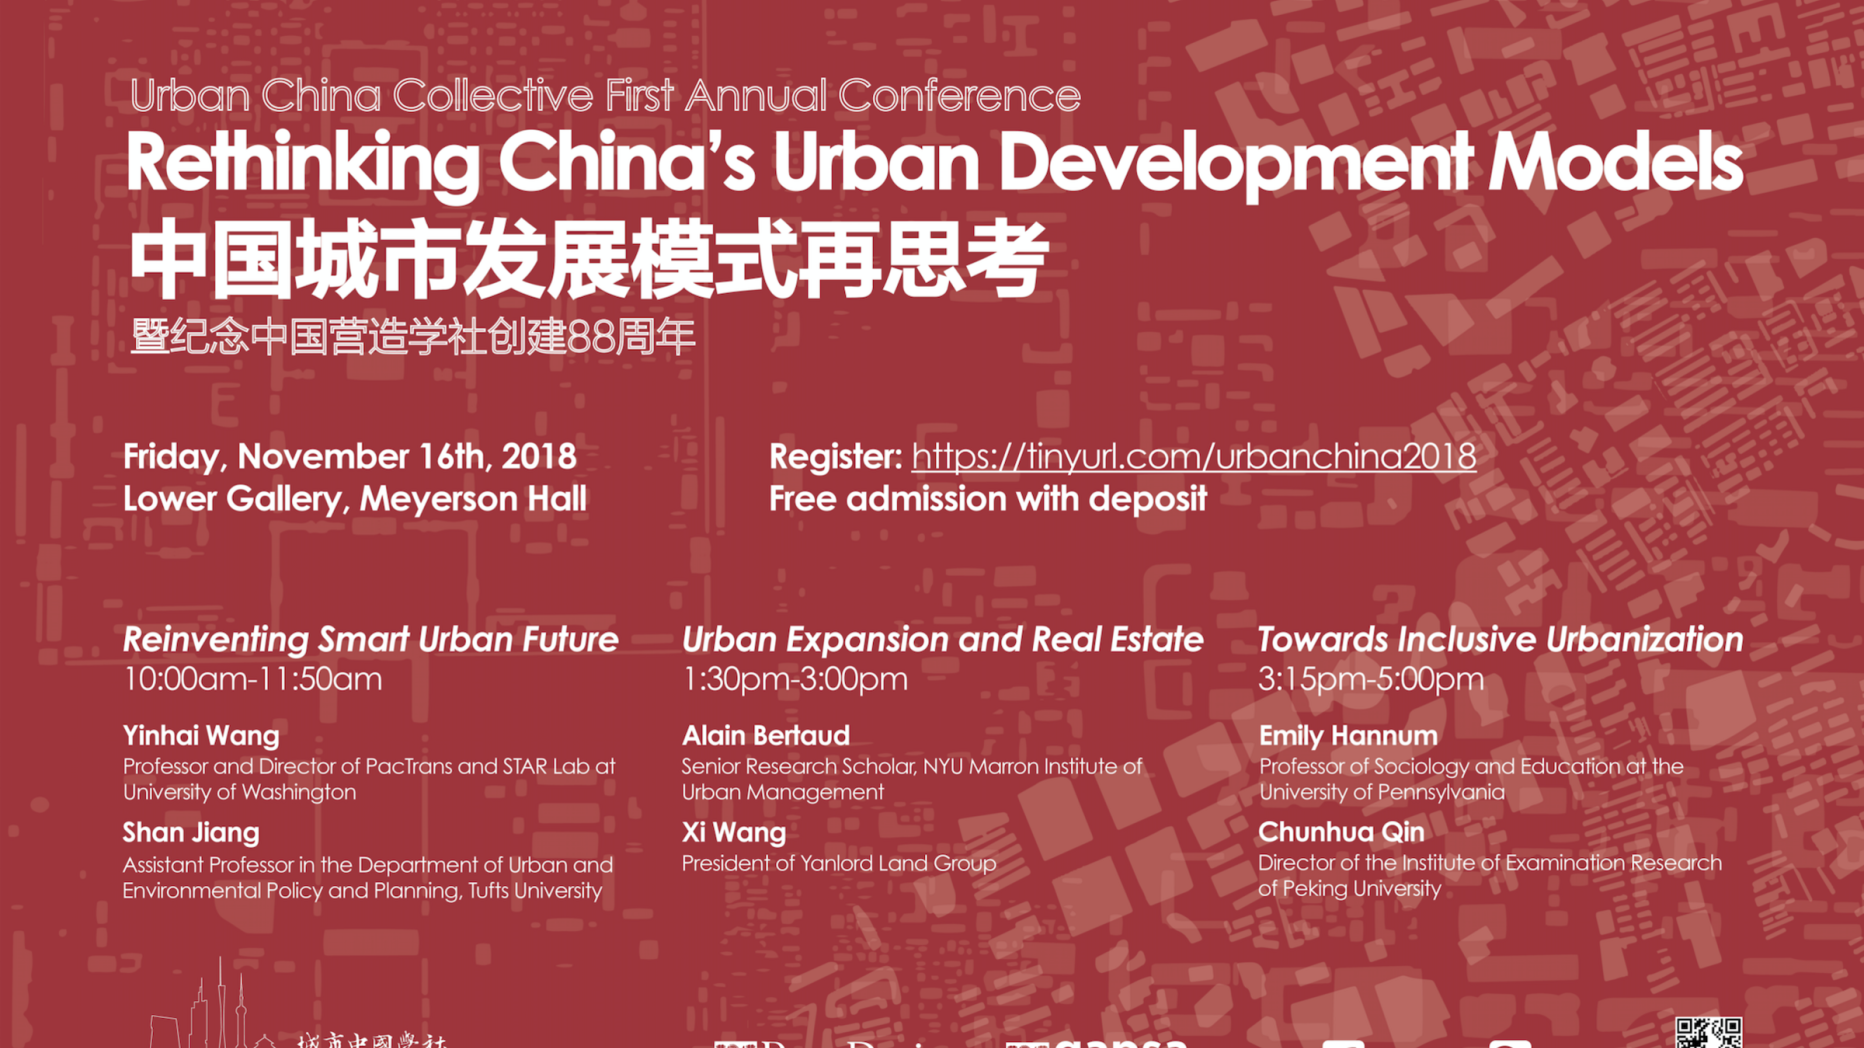 2018 First Annual Conference "Rethinking China's Urban Development Models" Poster